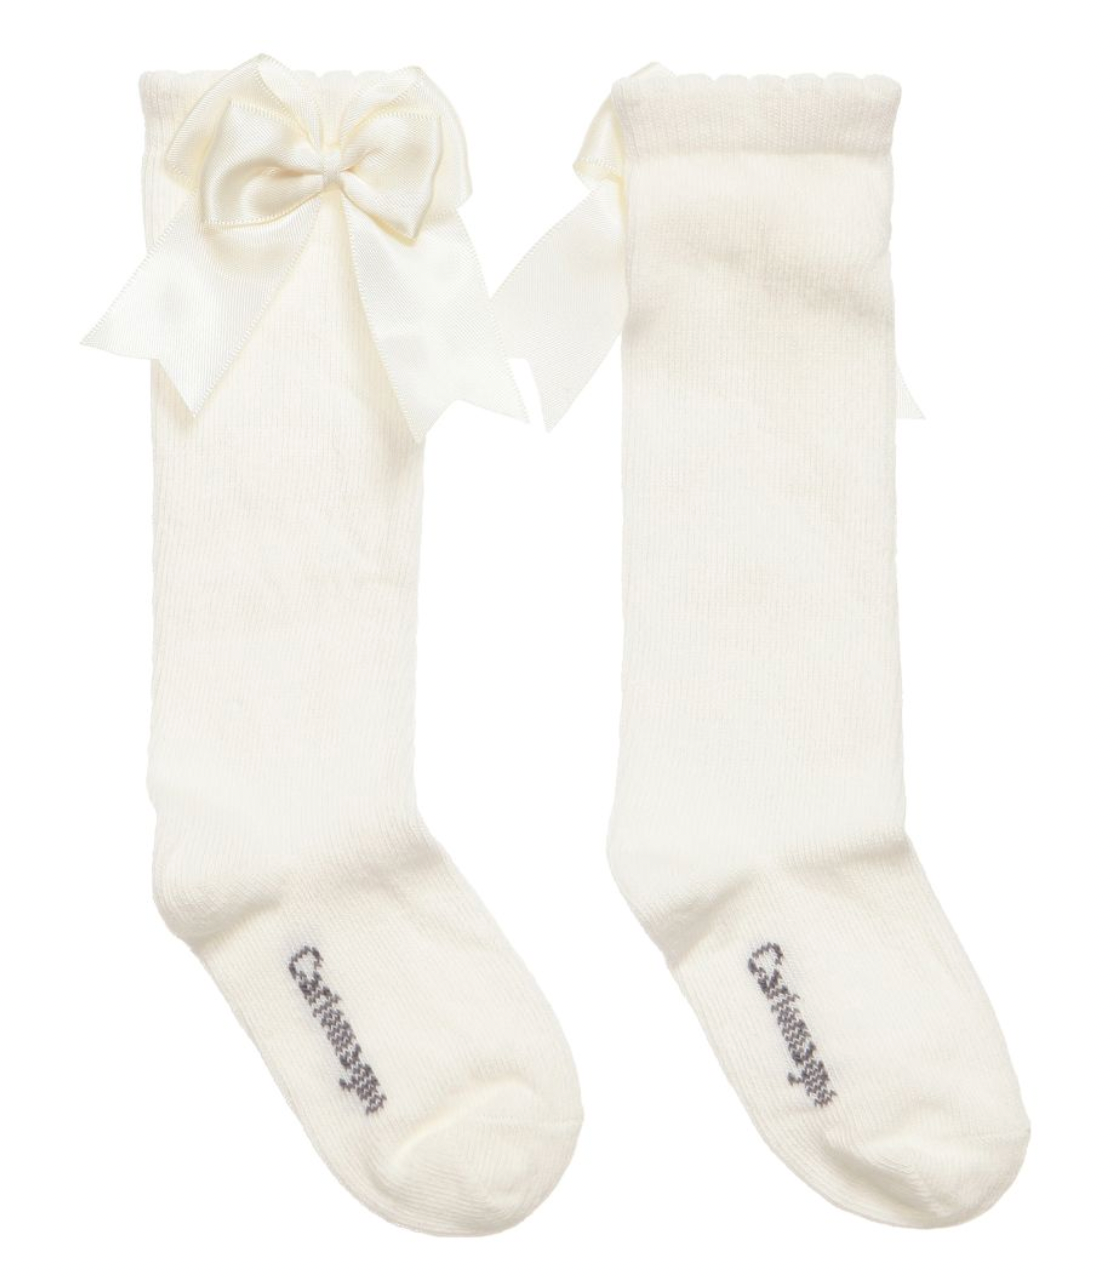 Carlomagno Knee High Socks with Bow - Natural Ivory